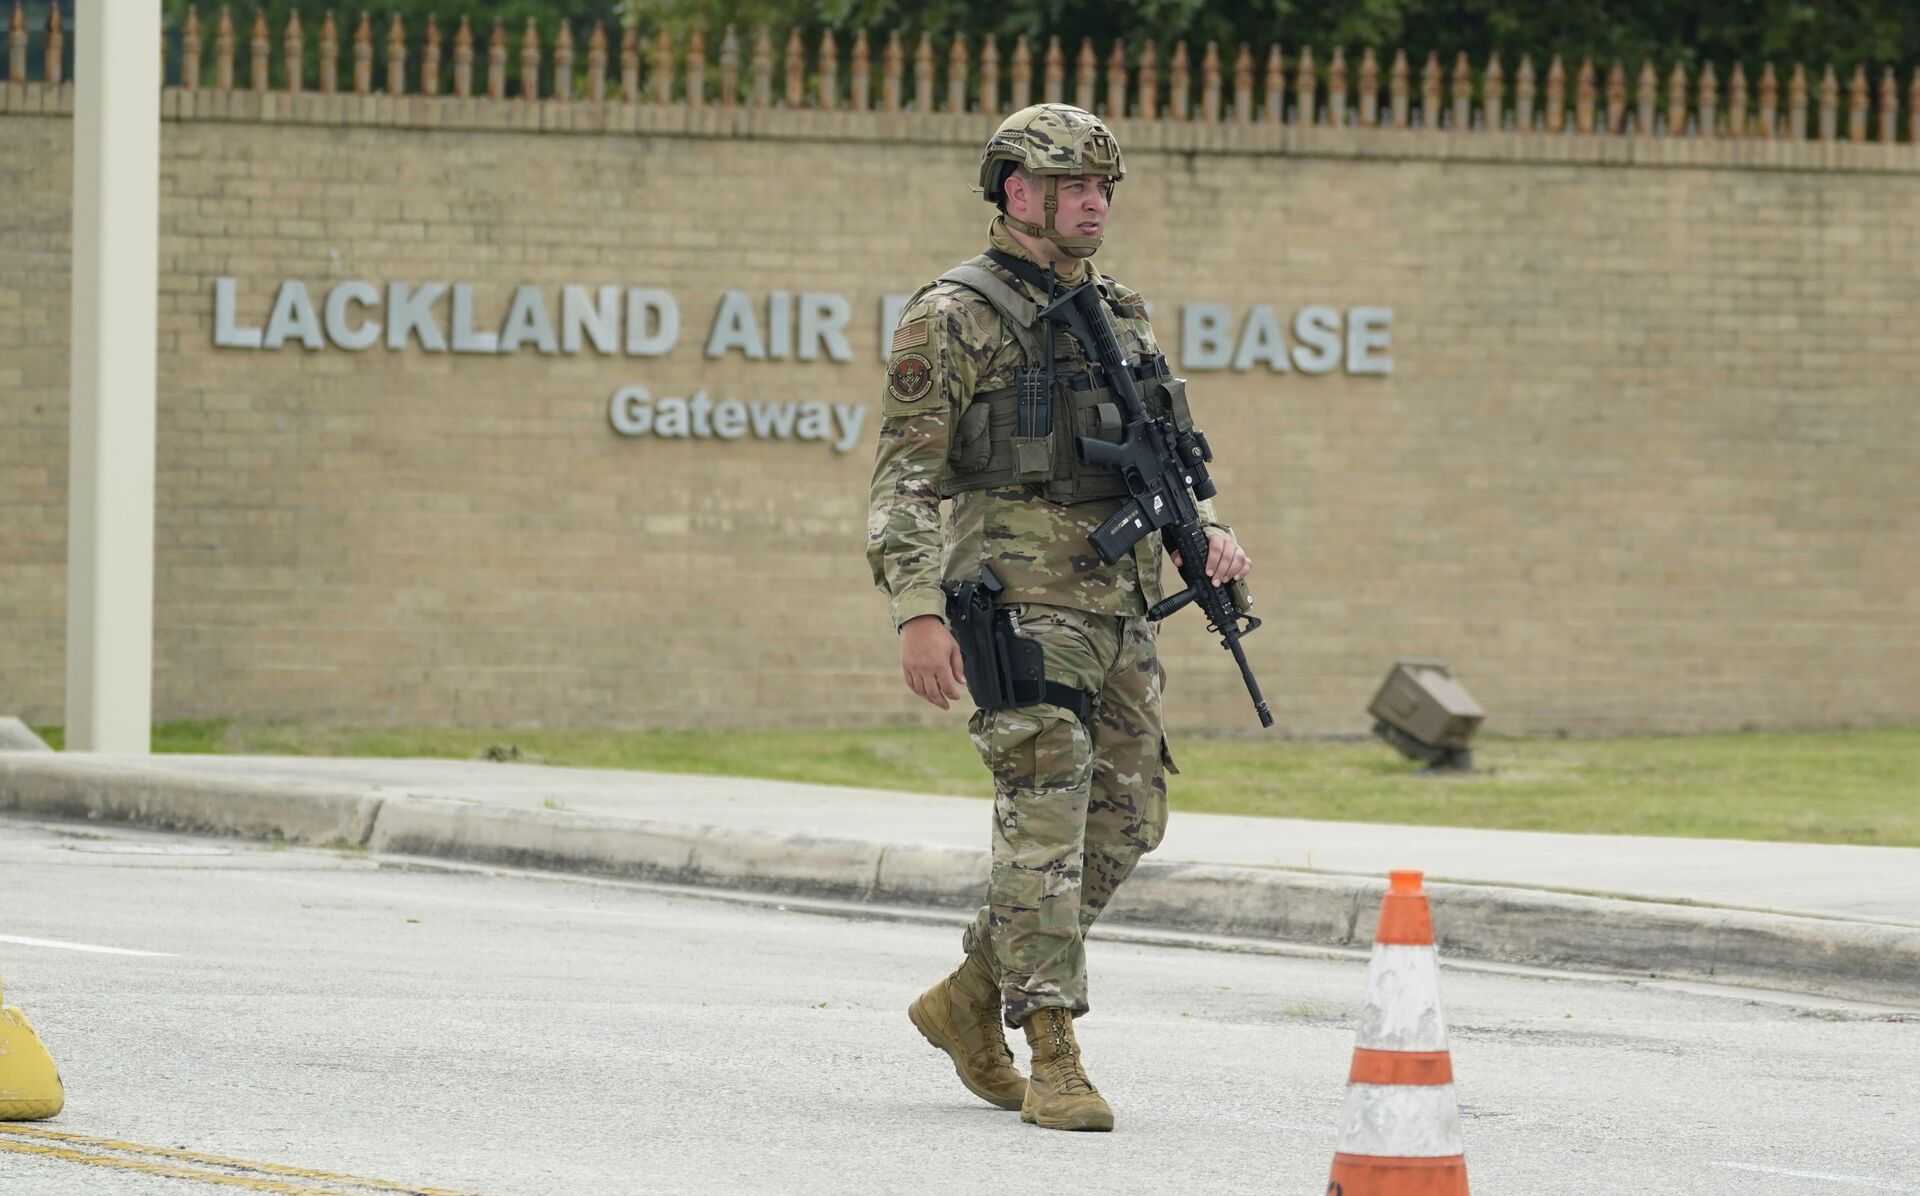 Lockdown Lifted at US Air Force Base in Texas, Following Reports of Gunfire  - Sputnik International, 1920, 10.06.2021